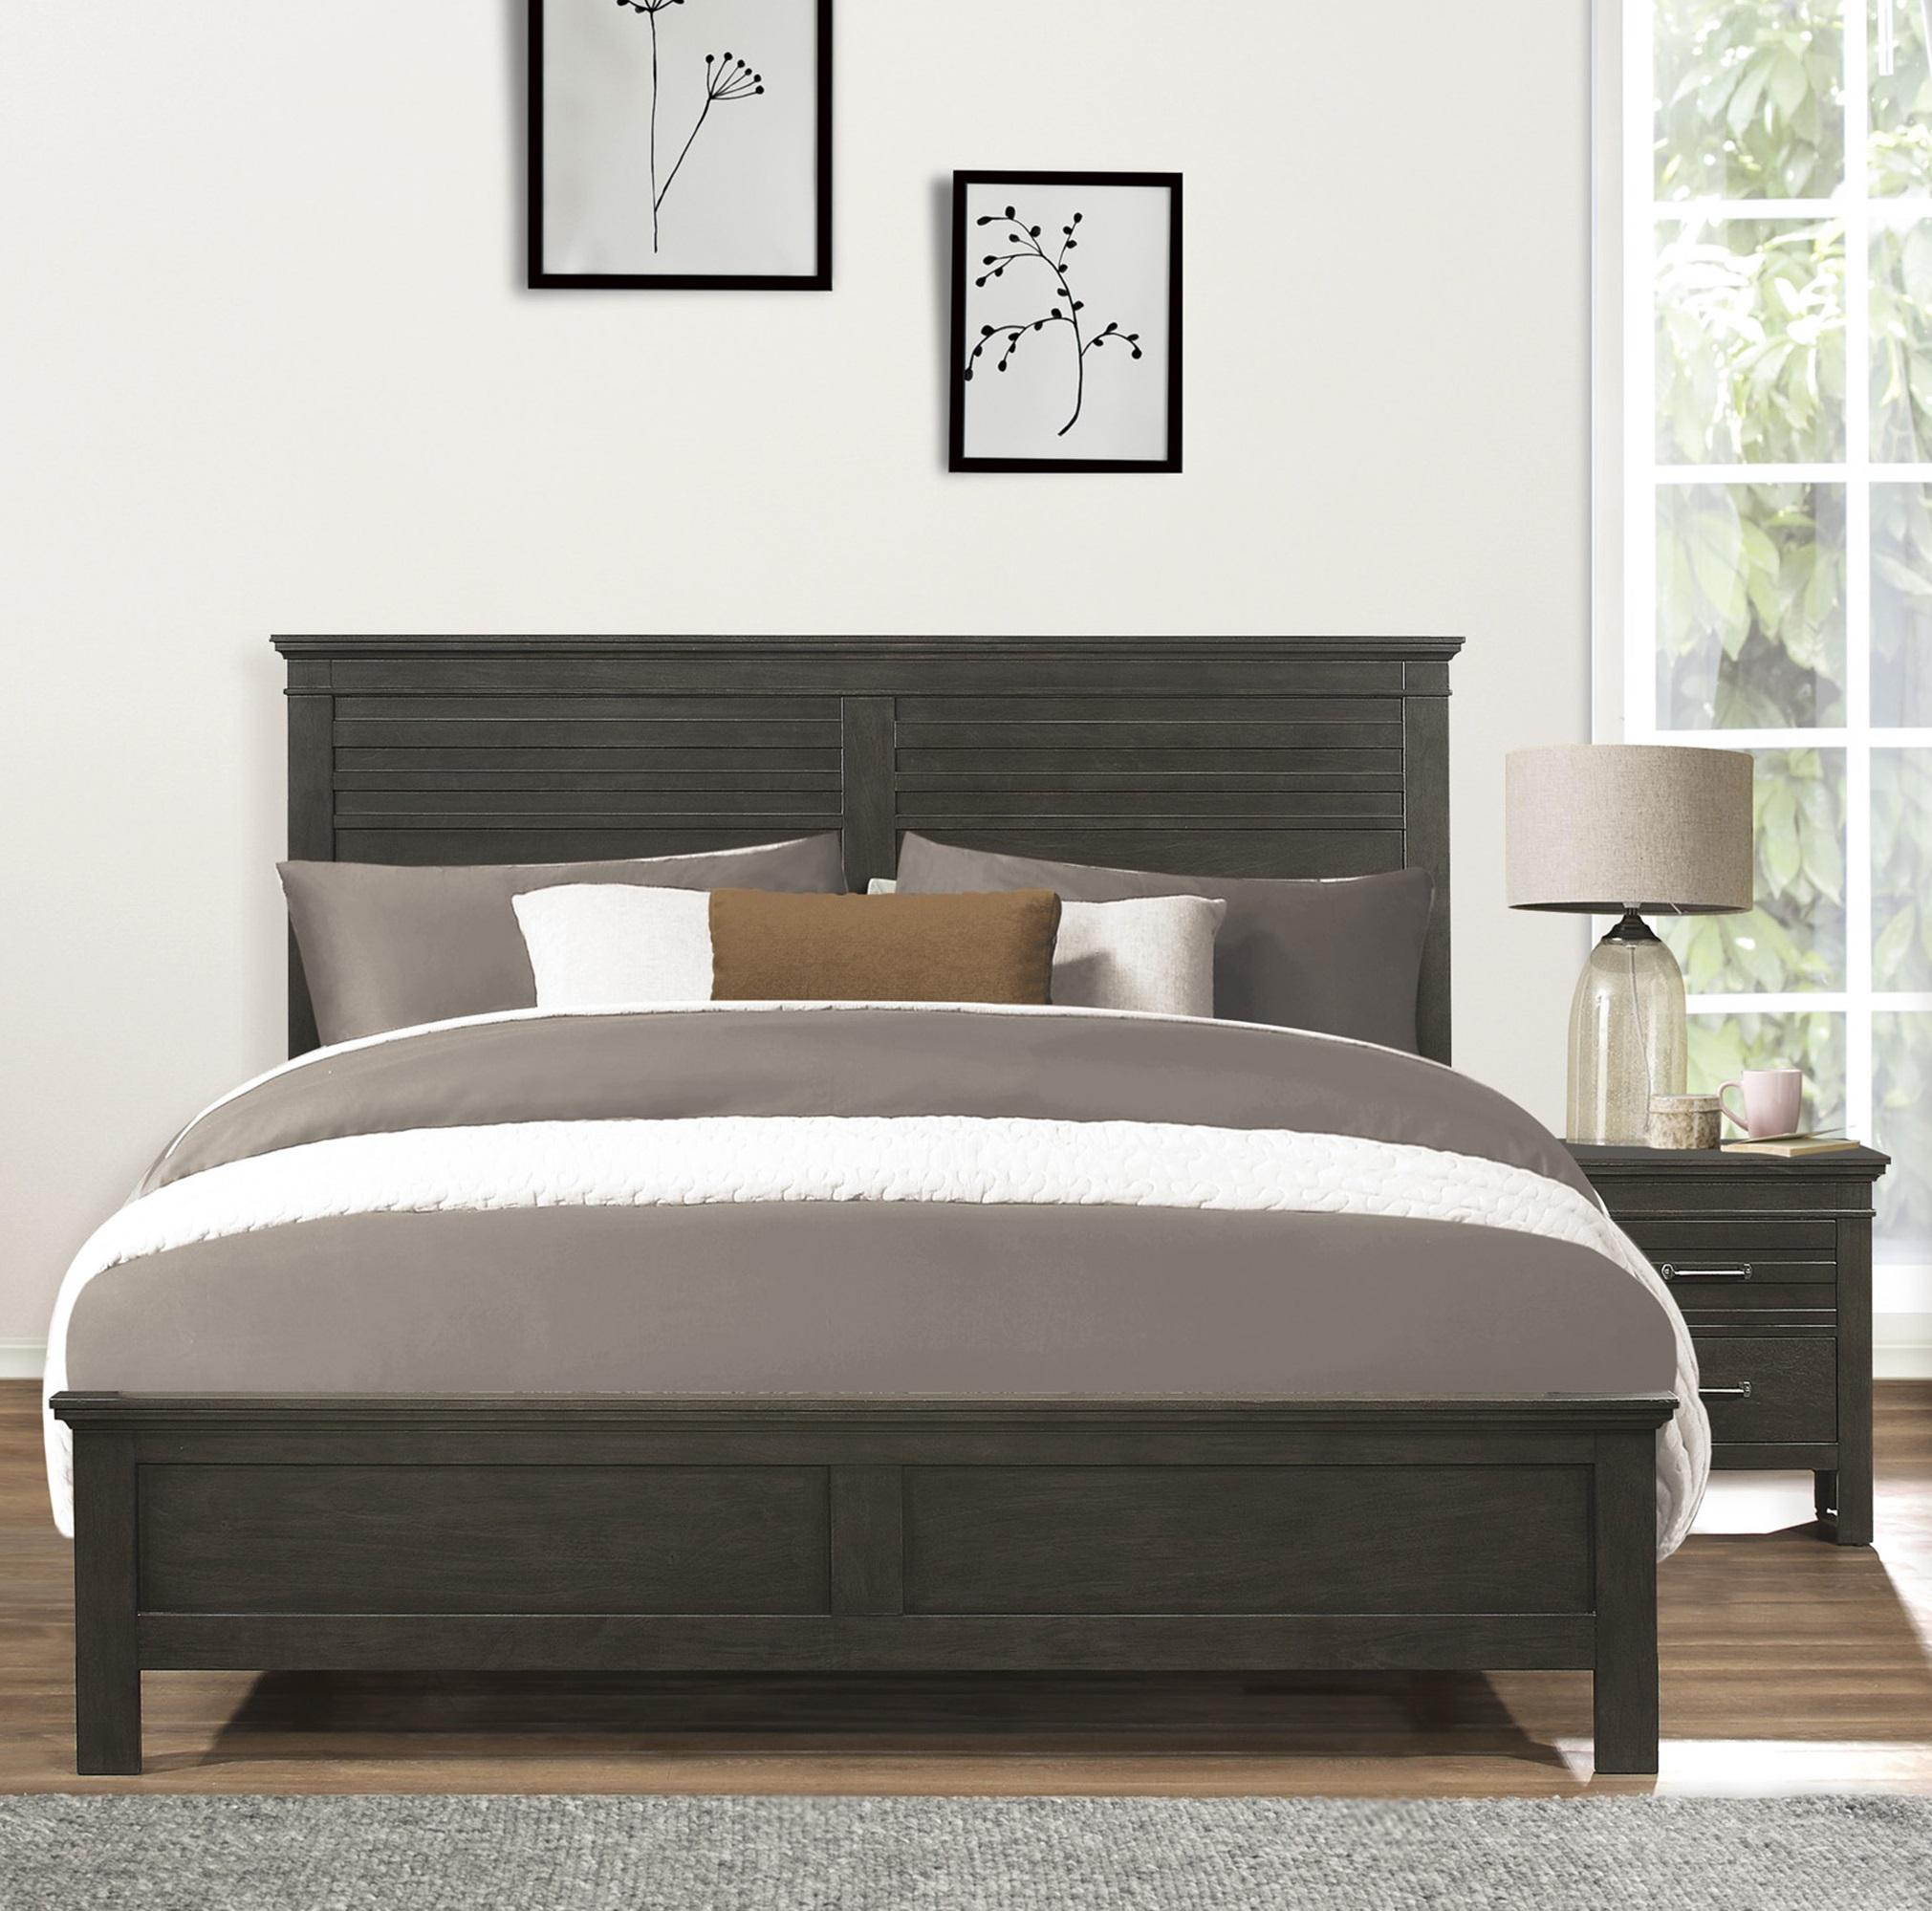 Transitional Bedroom Set 1675K-1CK-3PC Blaire Farm 1675K-1CK-3PC in Charcoal 